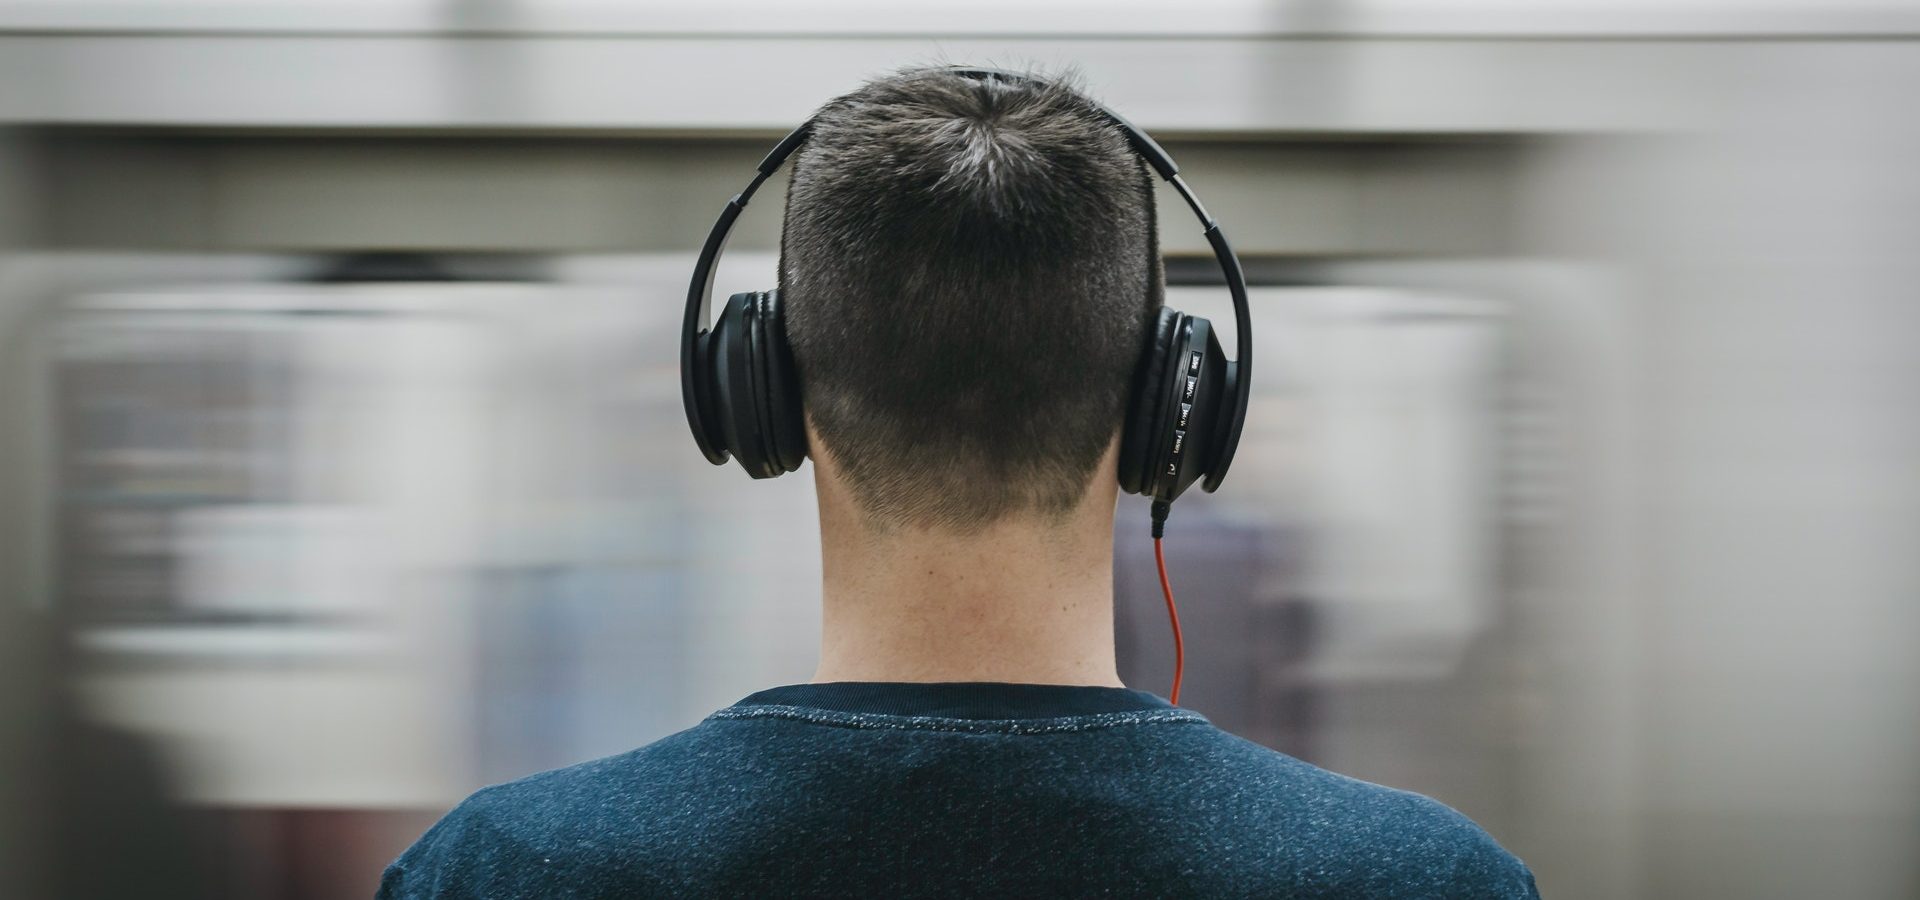 Man in public listening to loud music through his headphones, potentially causing noise-induced hearing loss